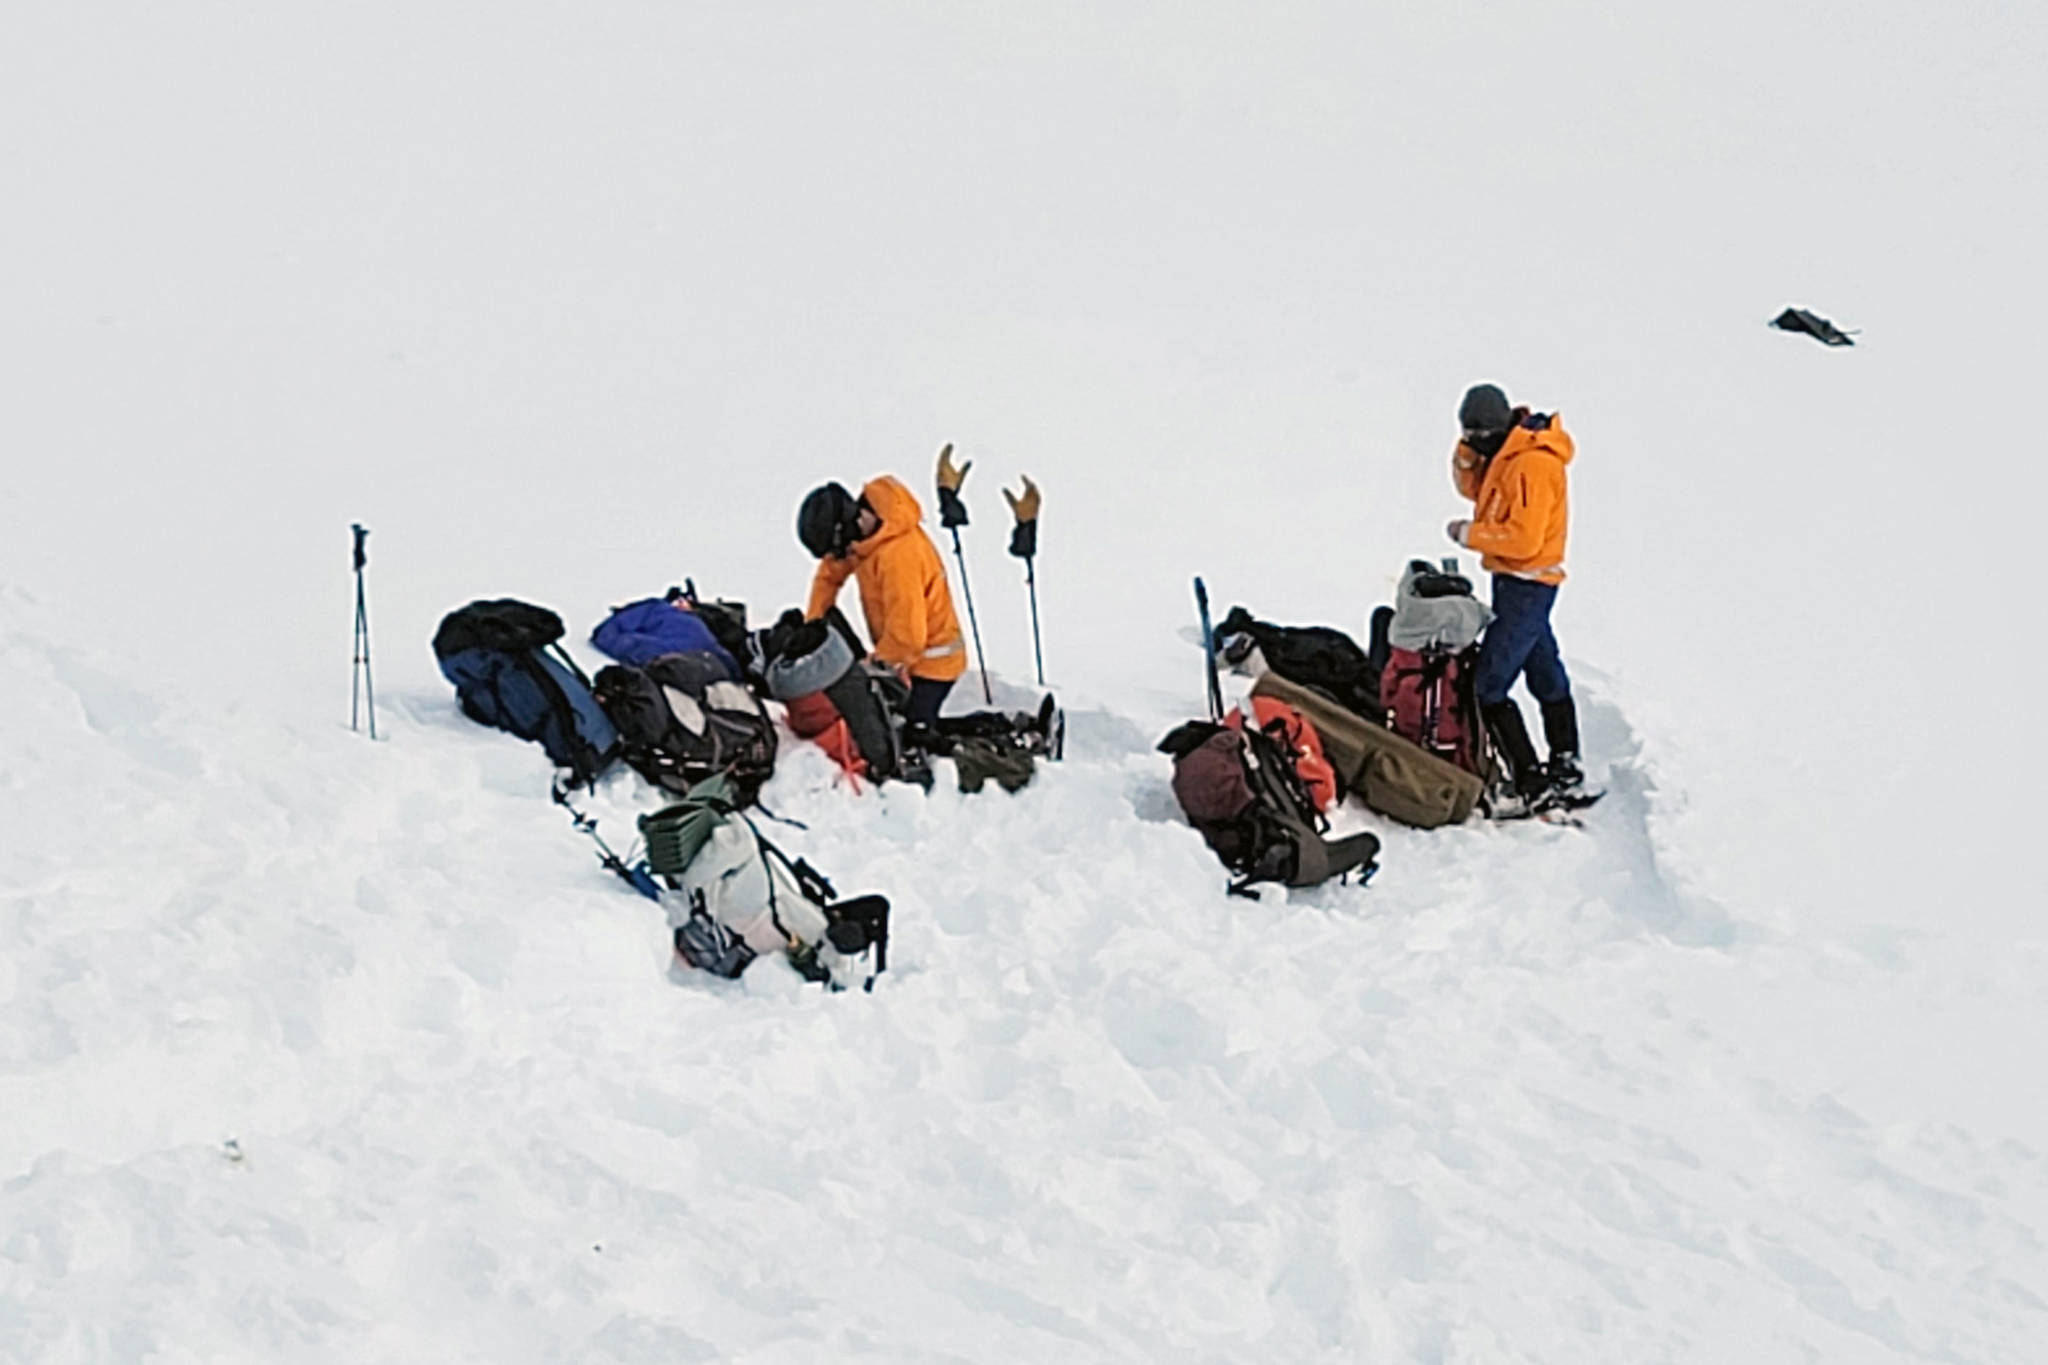 In this photo provided by the Alaska Mountain Rescue Group, some of the group’s volunteers work near the scene of a helicopter crash close to the Knik Glacier in Alaska on Sunday, March 28, 2021. Federal investigators say a helicopter carrying five passengers on a heli-skiing trip in Alaska crashed into a mountain and then rolled downhill nearly 900 feet. The pilot and four of the five passengers on board died in the crash, including billionaire Petr Kellner, the richest man in the Czech Republic. The National Transportation Safety Board is investigating the cause of the crash just north of Anchorage on Saturday night. (Lance Flint/Alaska Mountain Rescue Group via AP)